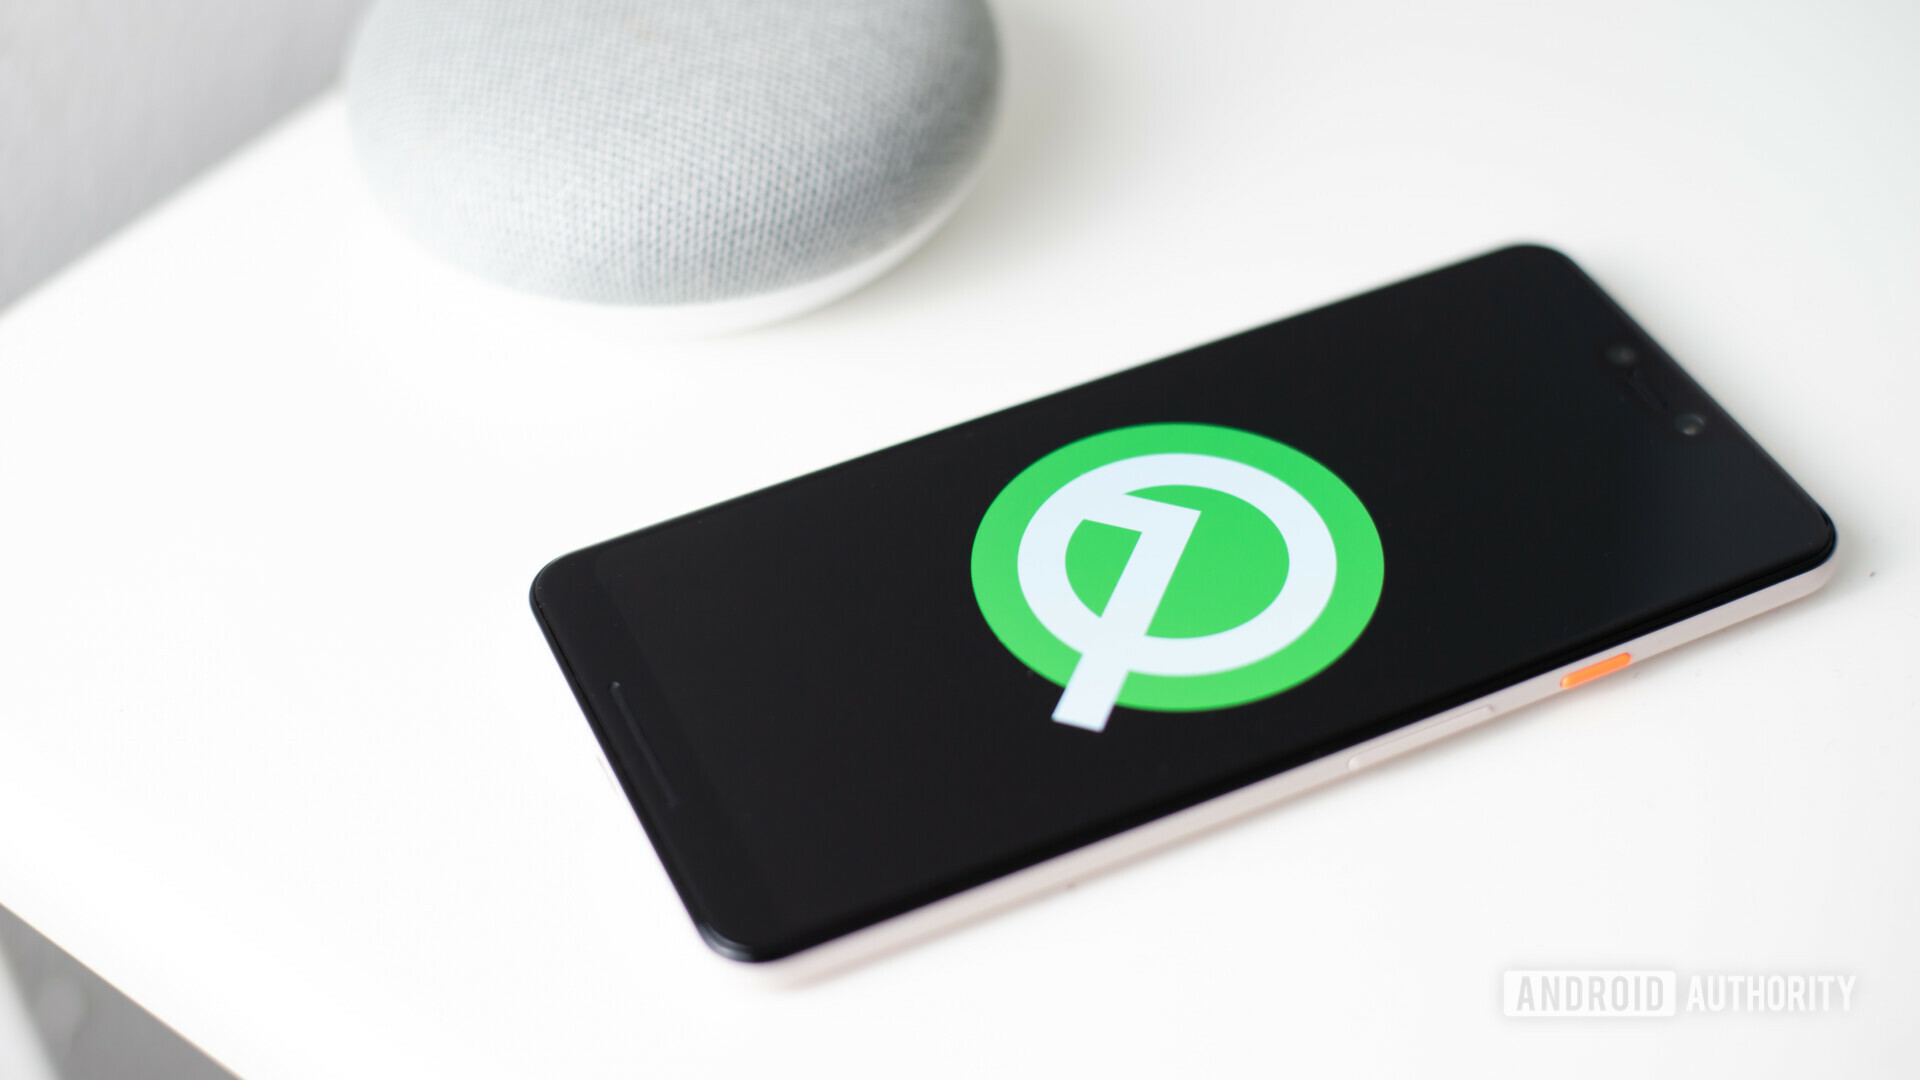 twin Grind Tyranny Update: How to enable the hidden dark mode in Android Q